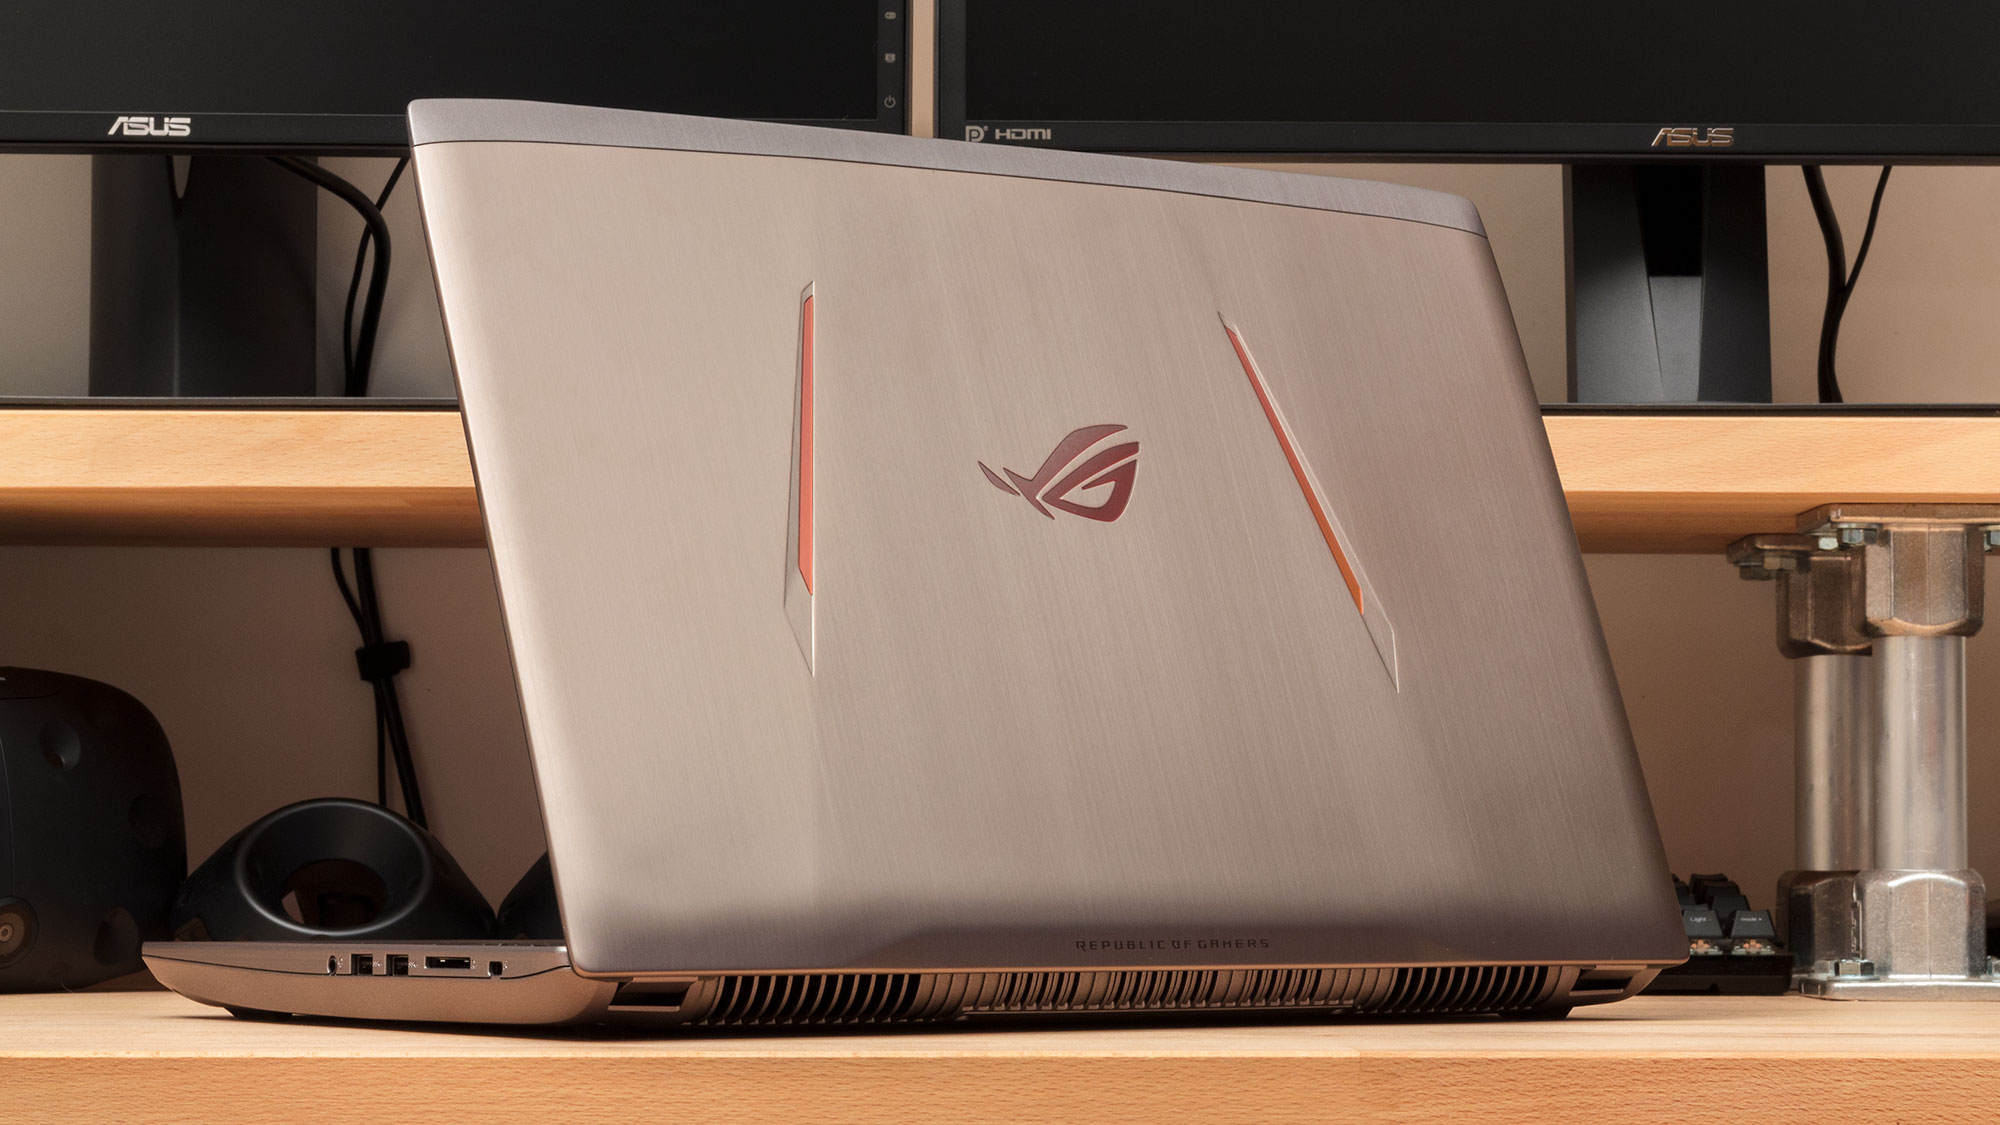 Take 120Hz to go with the ROG Strix GL502VS and GL702VS gaming laptops